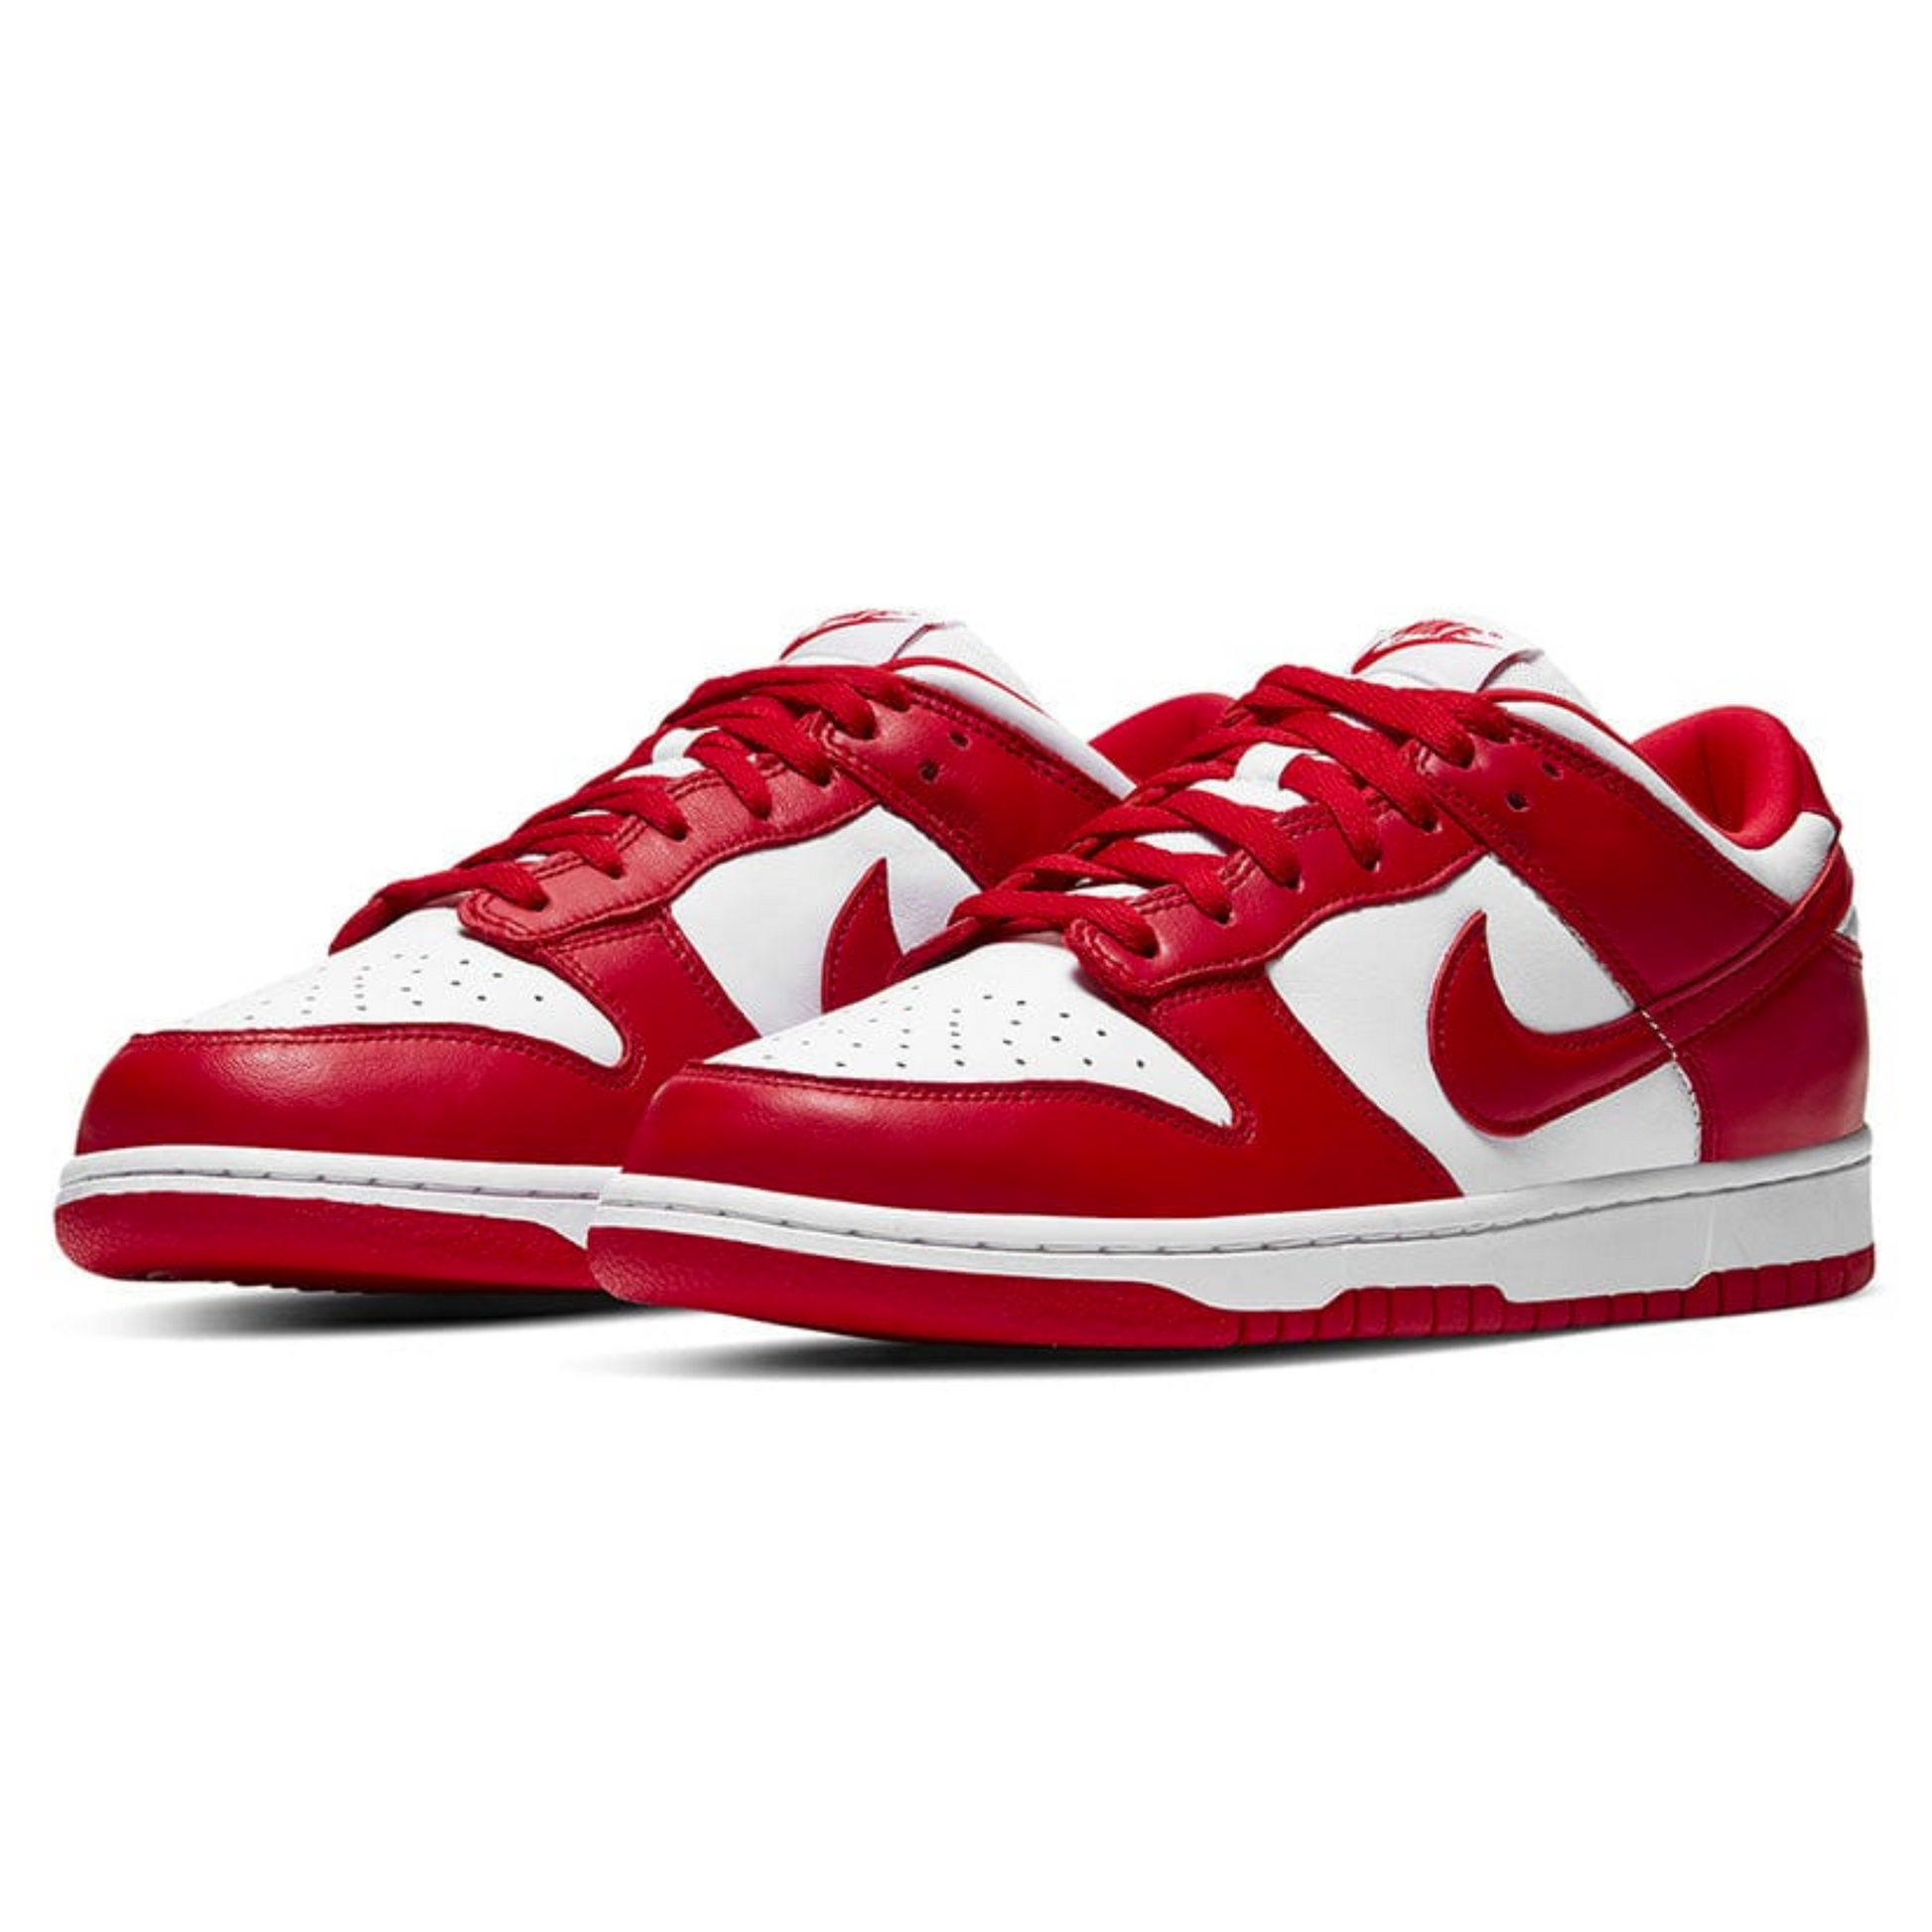 DD1391-602, Nike dunk low red white, USC gym red, sneakers